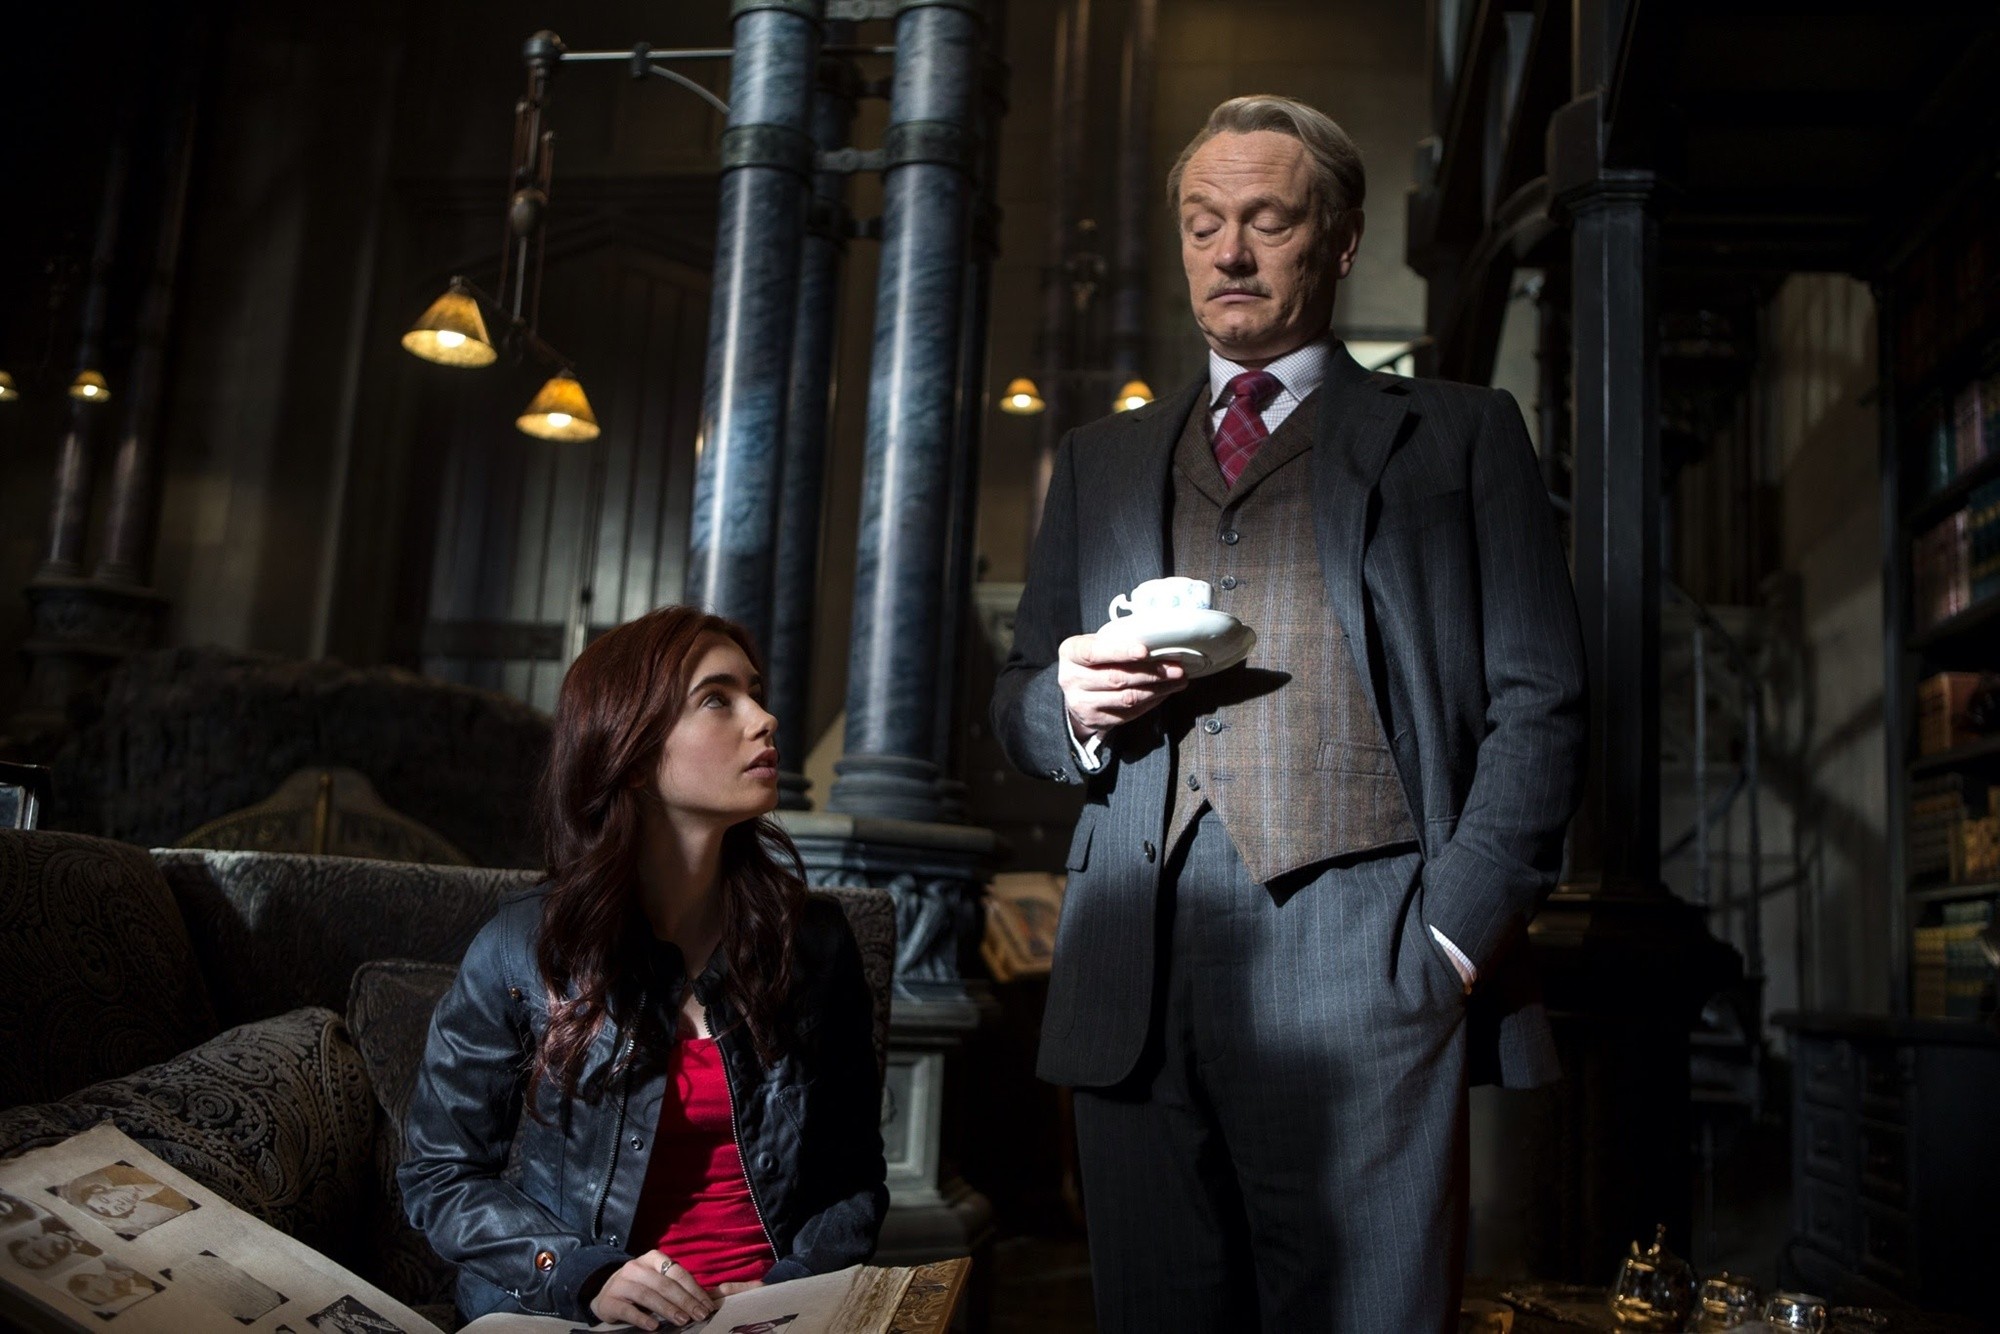 Lily Collins stars as Clary Fray and Jared Harris stars as Hodge in Screen Gems' The Mortal Instruments: City of Bones (2013). Photo credit by Rafy.